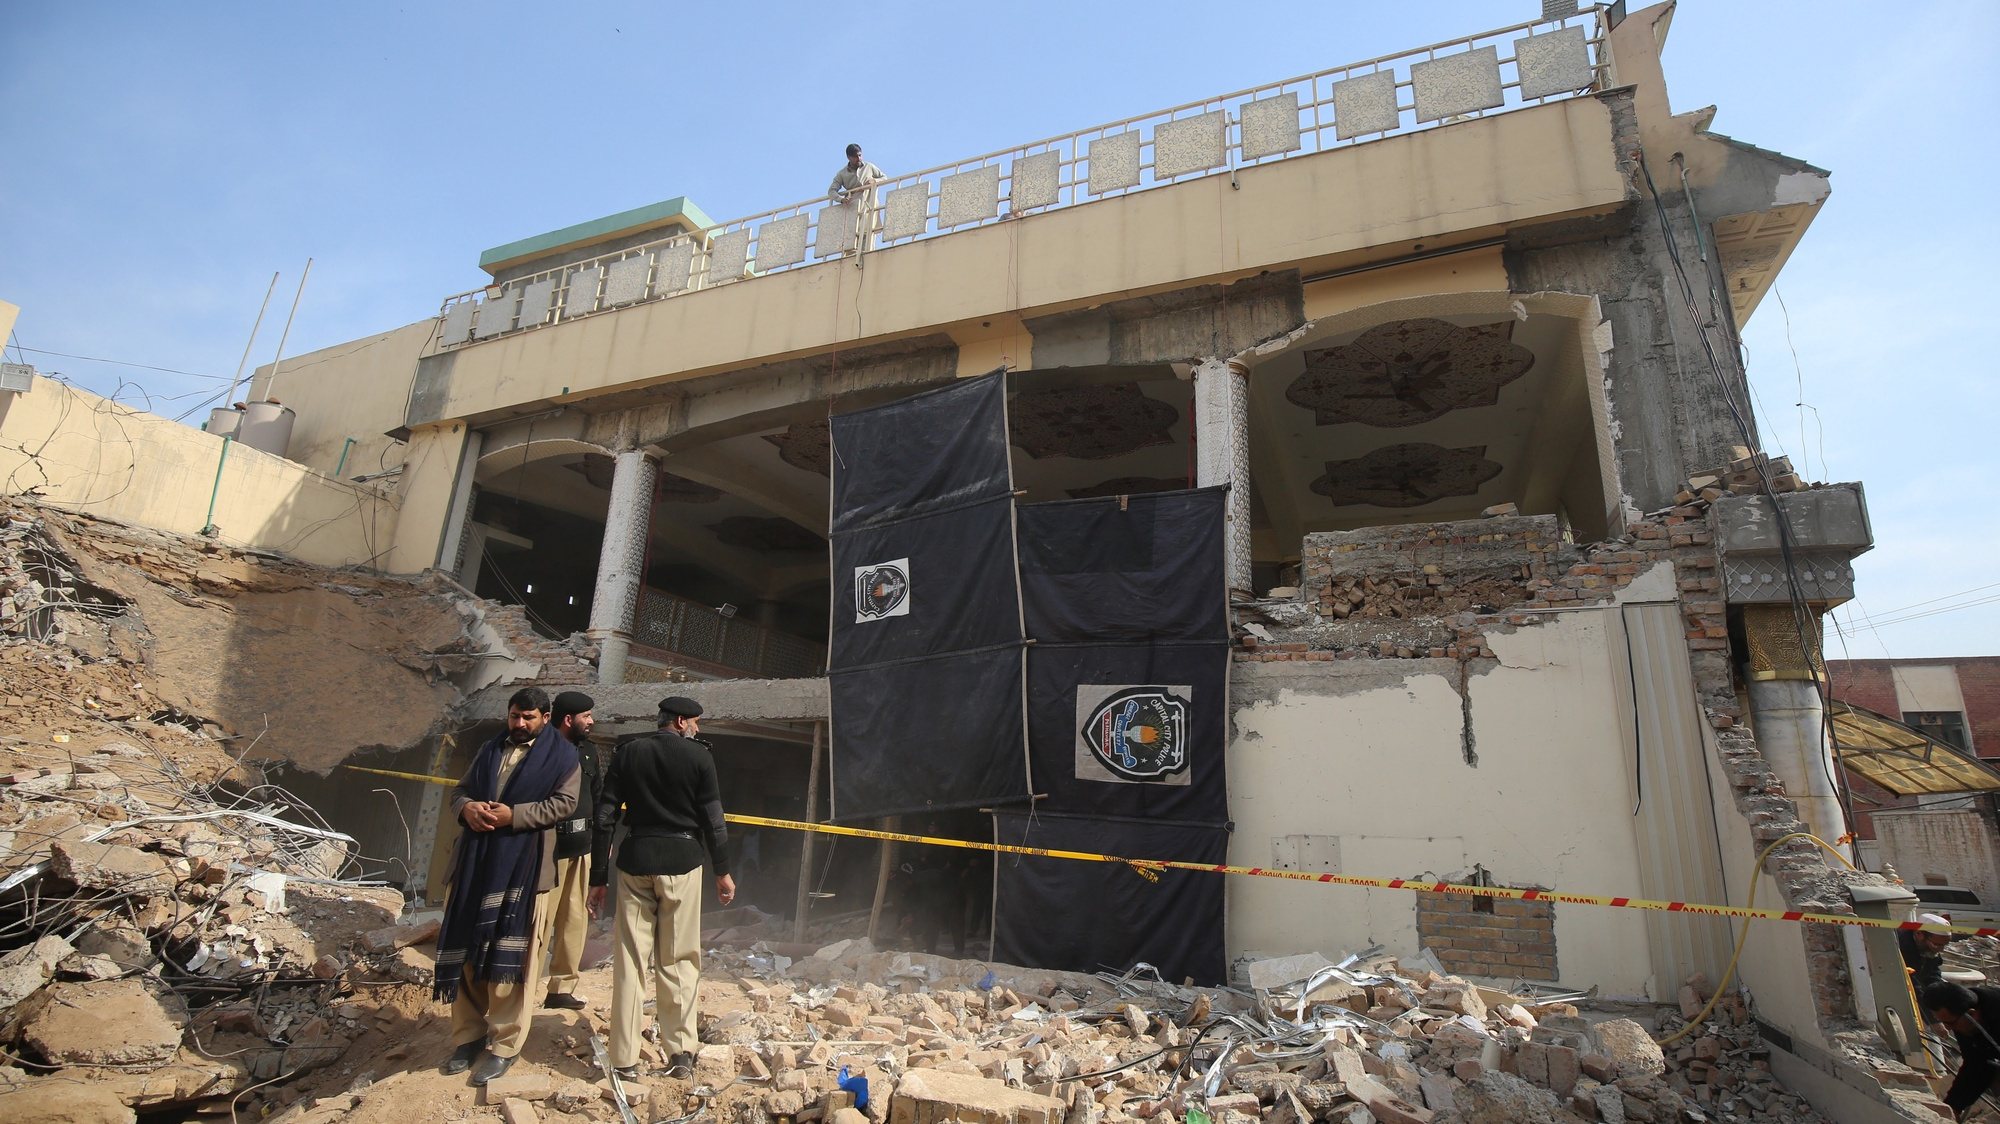 epa10443124 Police inspect the site of a Mosque that was destroyed in a suicide bomb blast on 30 January, in Peshawar, Pakistan, 01 February 2023. The Pakistani government is evaluating the possibility of launching a large-scale operation against the local Taliban offshoot in response to the brutal bombing at a mosque in Peshawar which killed at least 100 people, most of them police officers, as part of a steady deteriorating security landscape in the country with terrorism on the rise. Defense Minister Khawaja Asif had urged all parties in the National Assembly to unite against terrorism and launch an operation against the Taliban similar to a 2014 offensive.  EPA/ARSHAD ARBAB